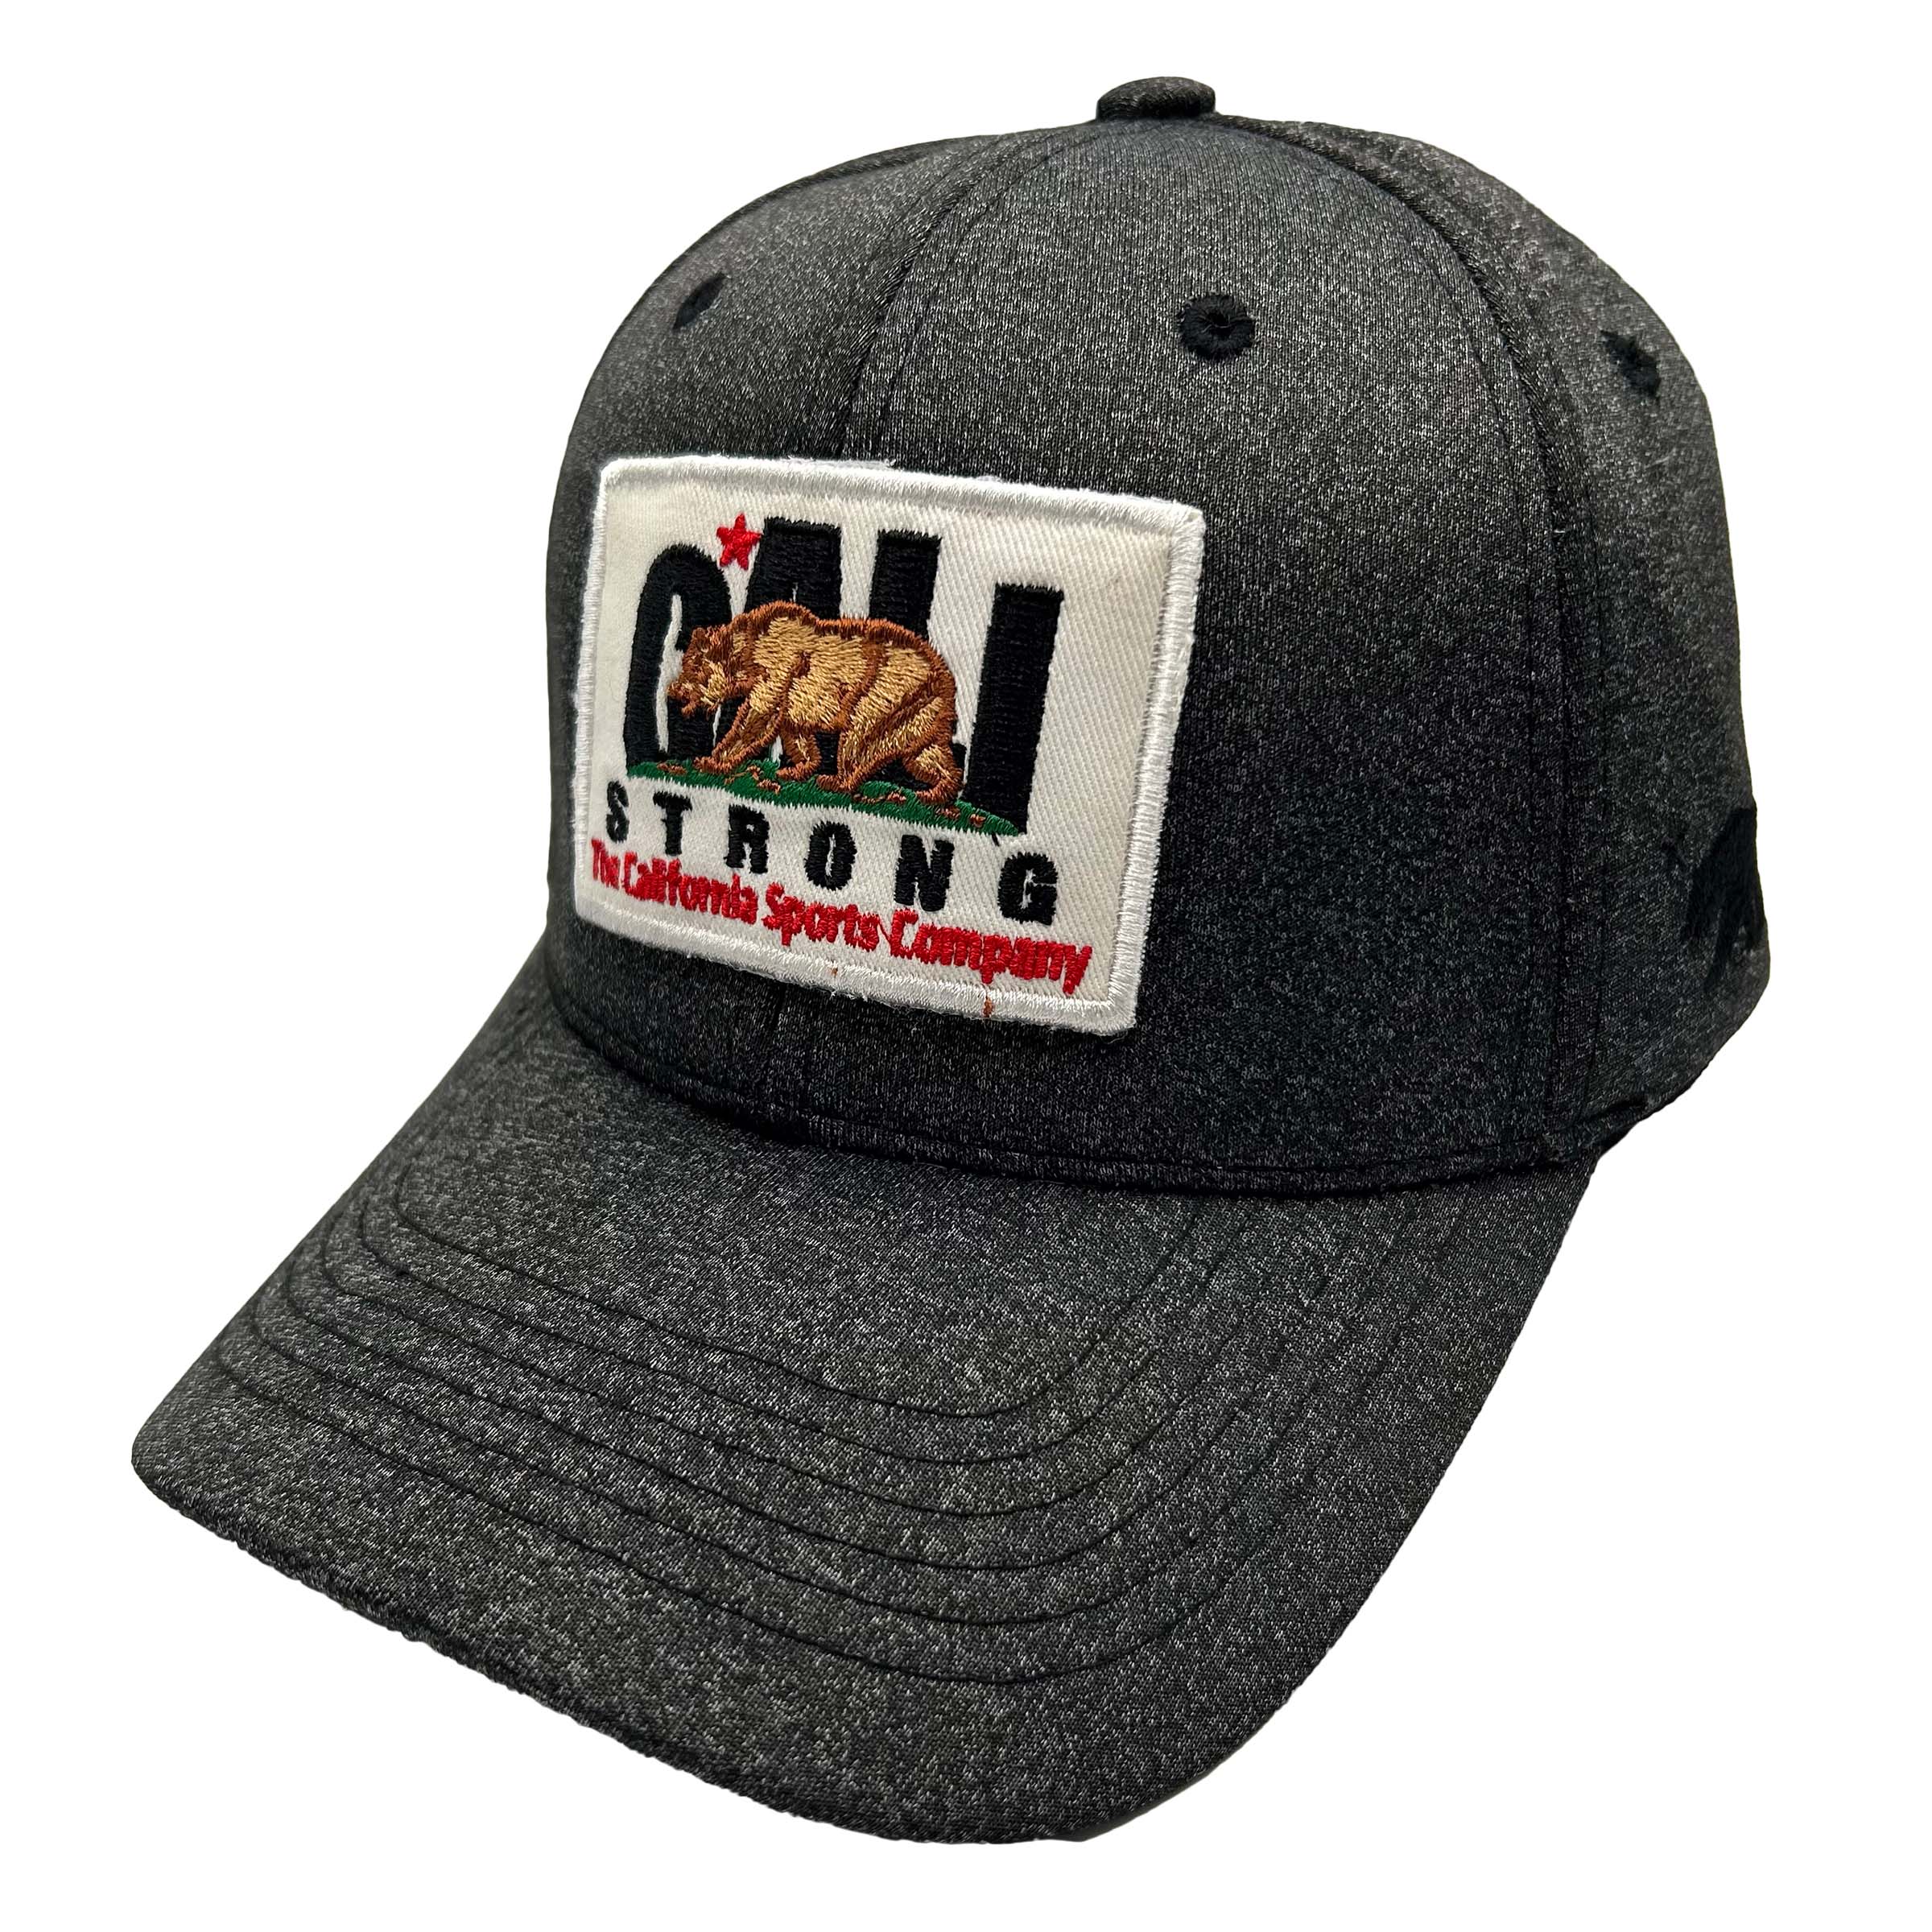 CALI Strong Original Tactical Hat Curved Brim Morale Patch Dark Grey Heather White - Headwear - Image 1 - CALI Strong